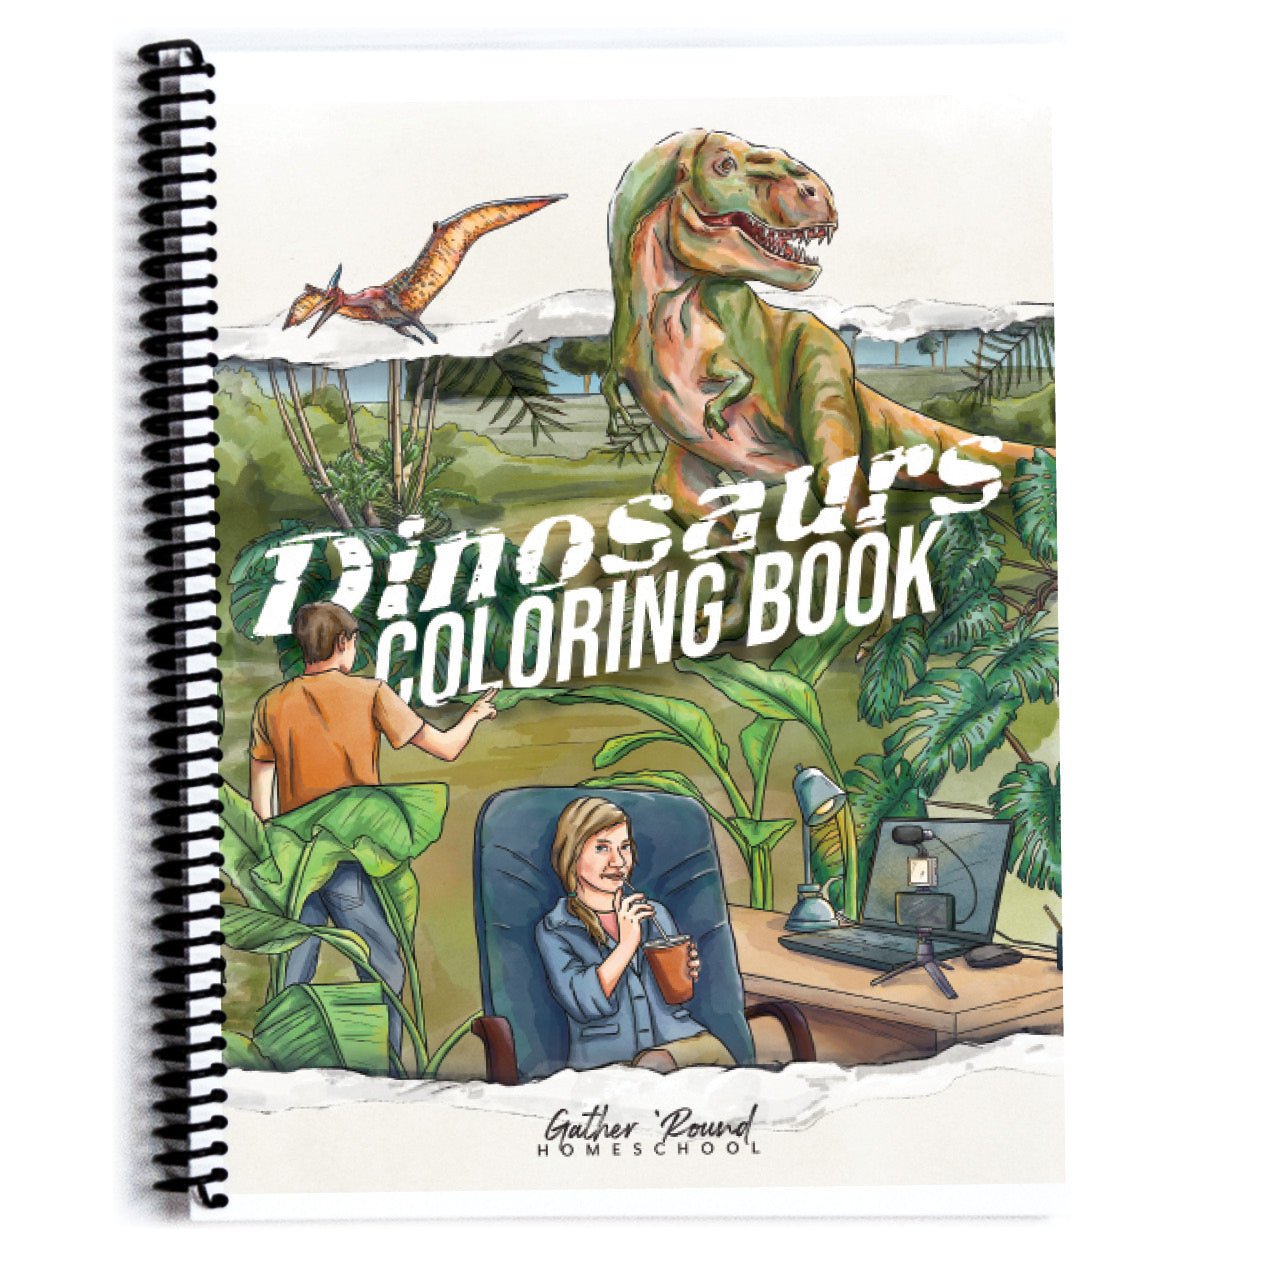 DINOSAUR Coloring Books Kids Fun Pages Digital Download -  Canada